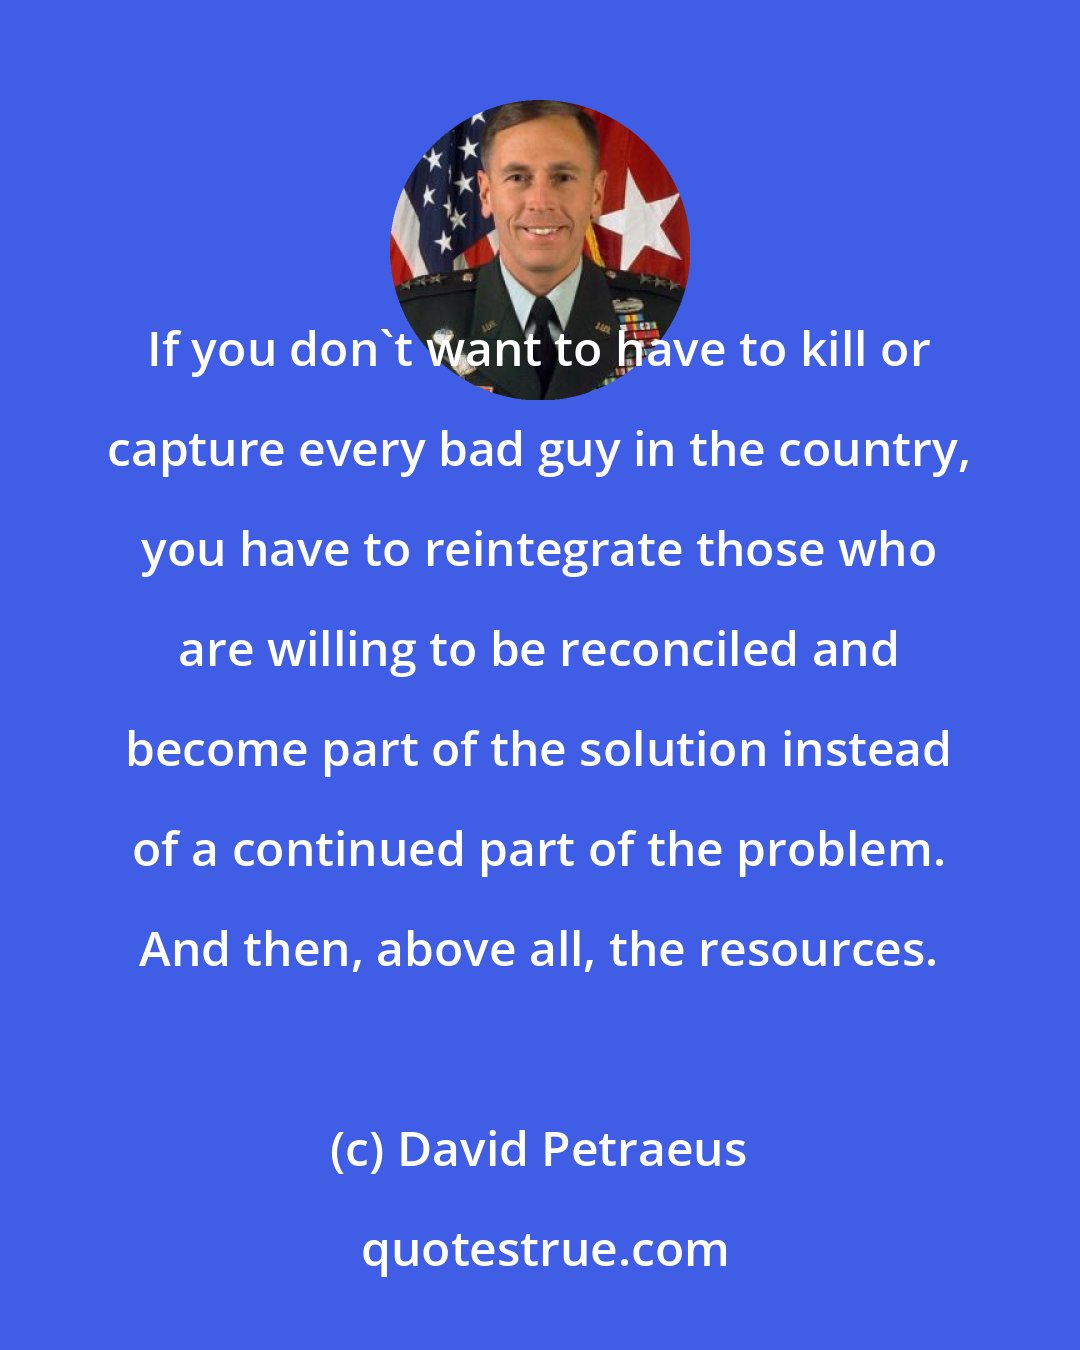 David Petraeus: If you don't want to have to kill or capture every bad guy in the country, you have to reintegrate those who are willing to be reconciled and become part of the solution instead of a continued part of the problem. And then, above all, the resources.